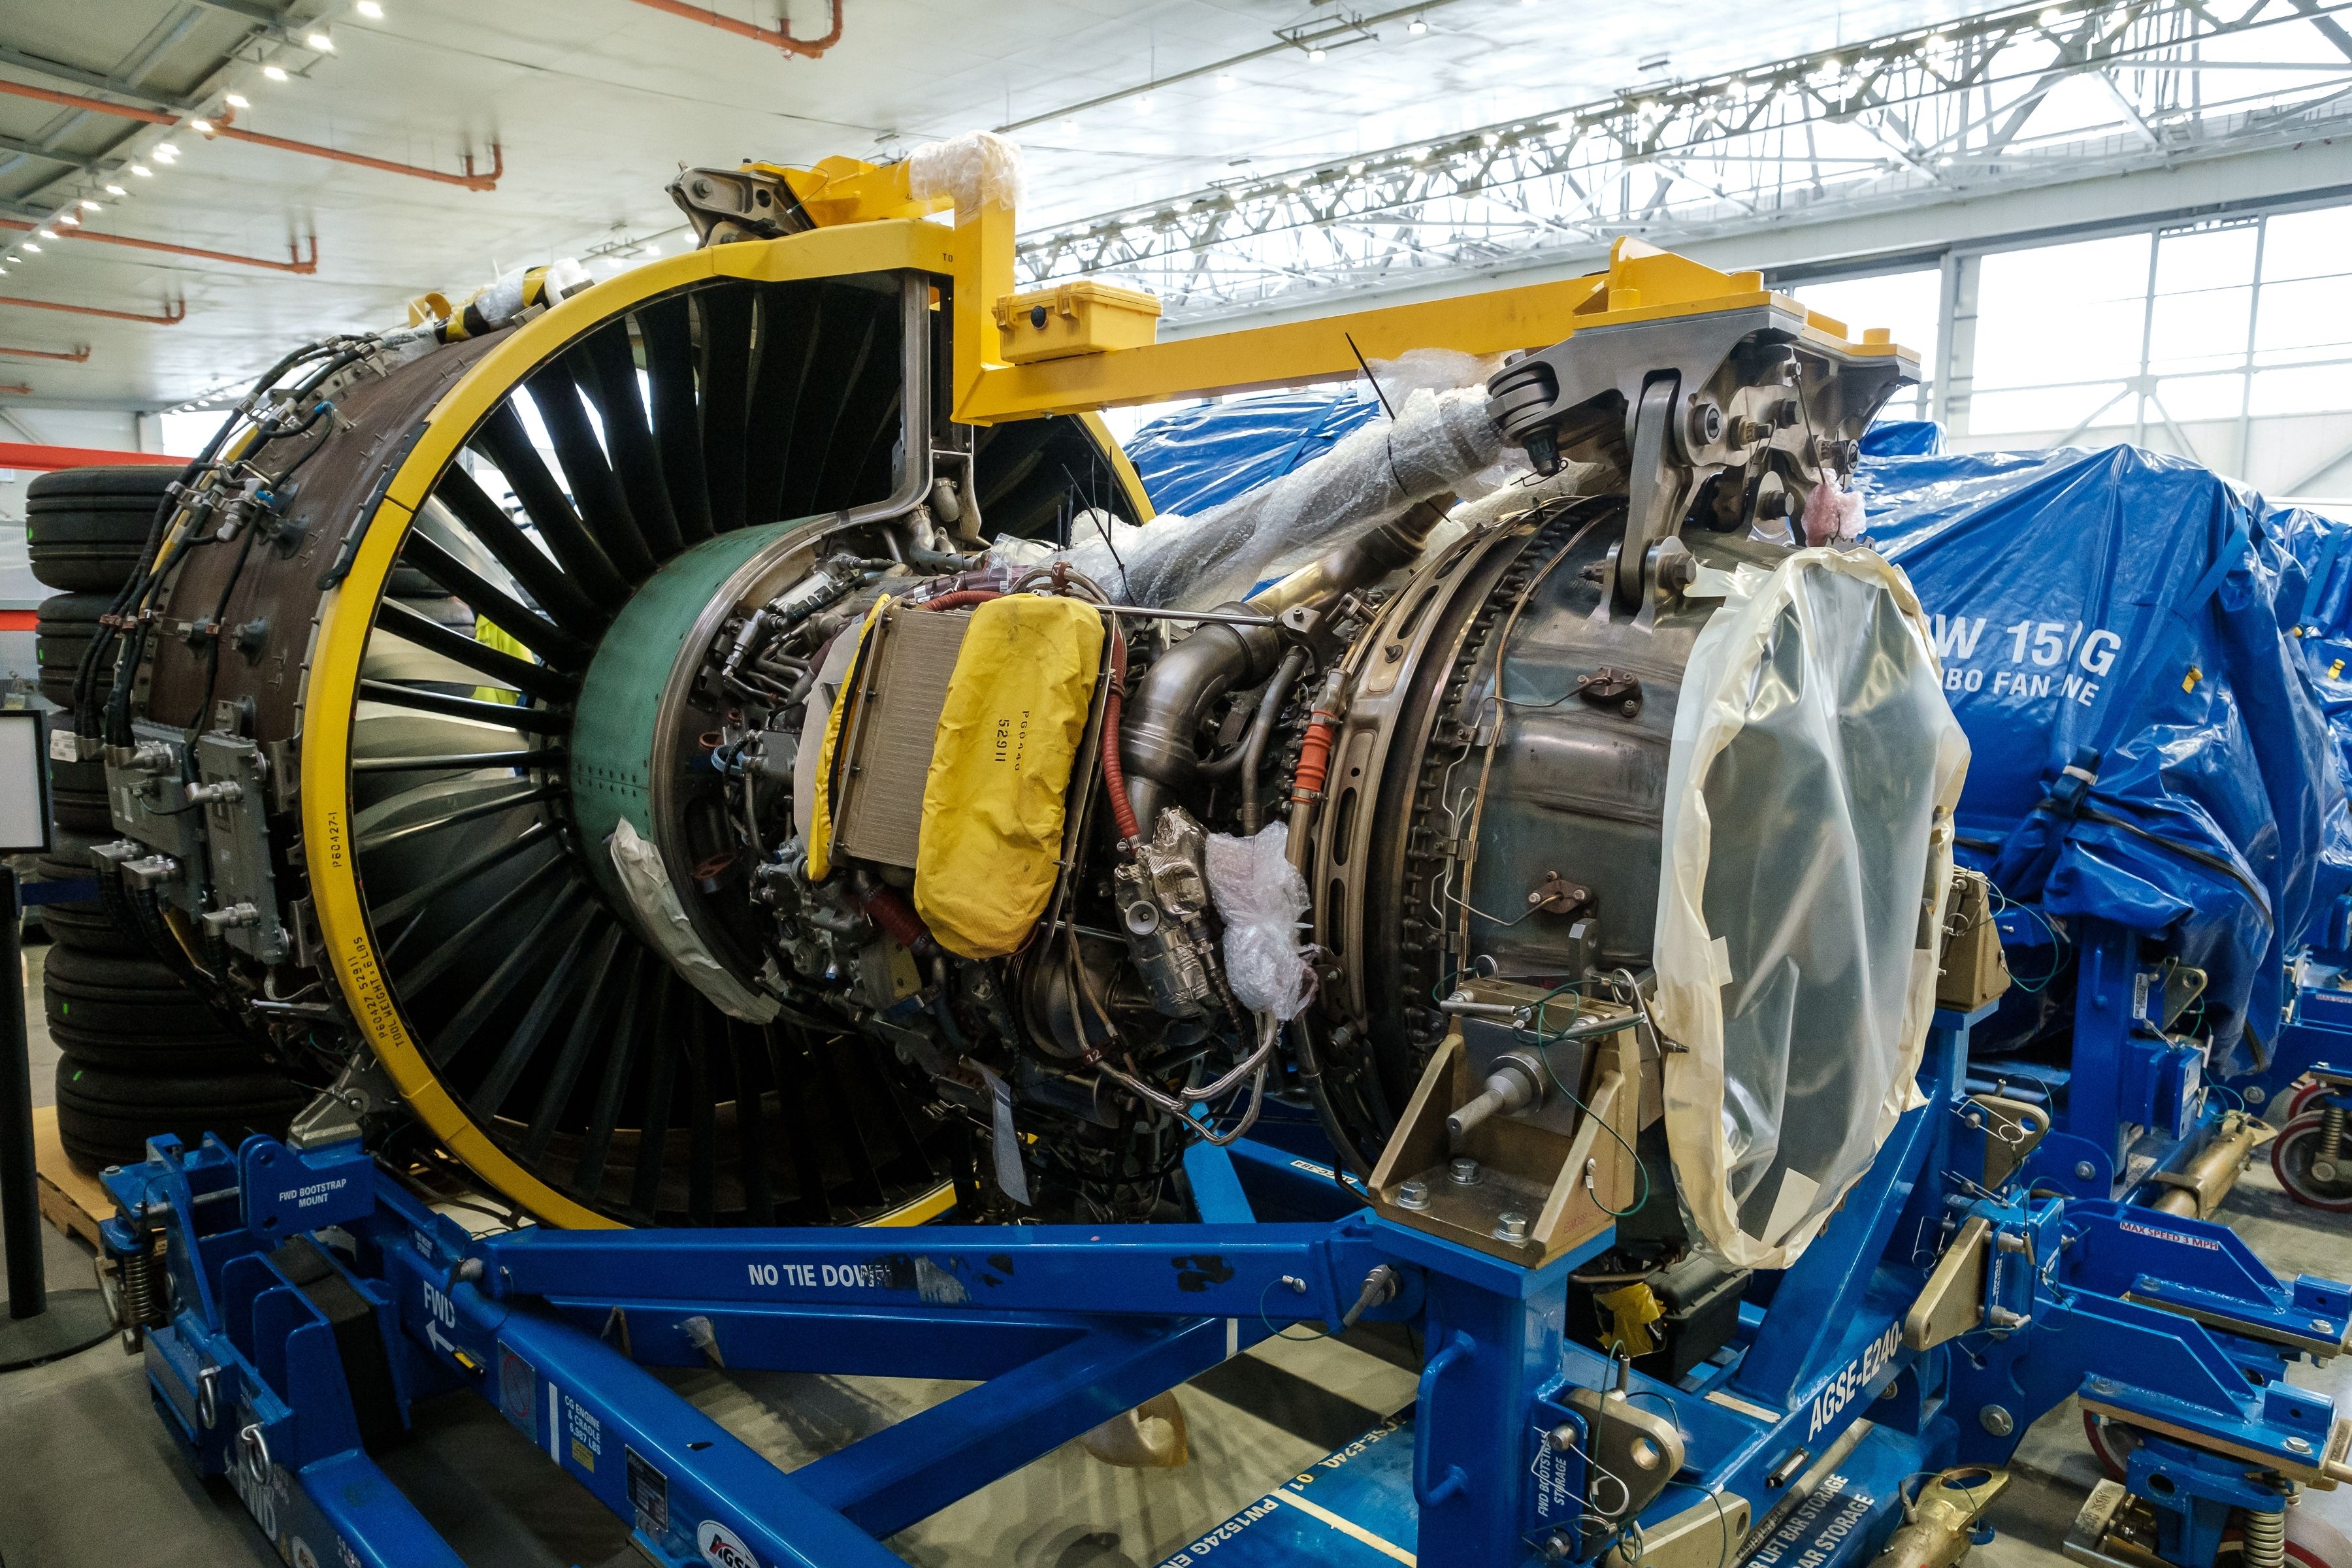 A partially disassembled Pratt Whitney PW1500G engine of an Airbaltic Airbus A220 displayed during a press event.